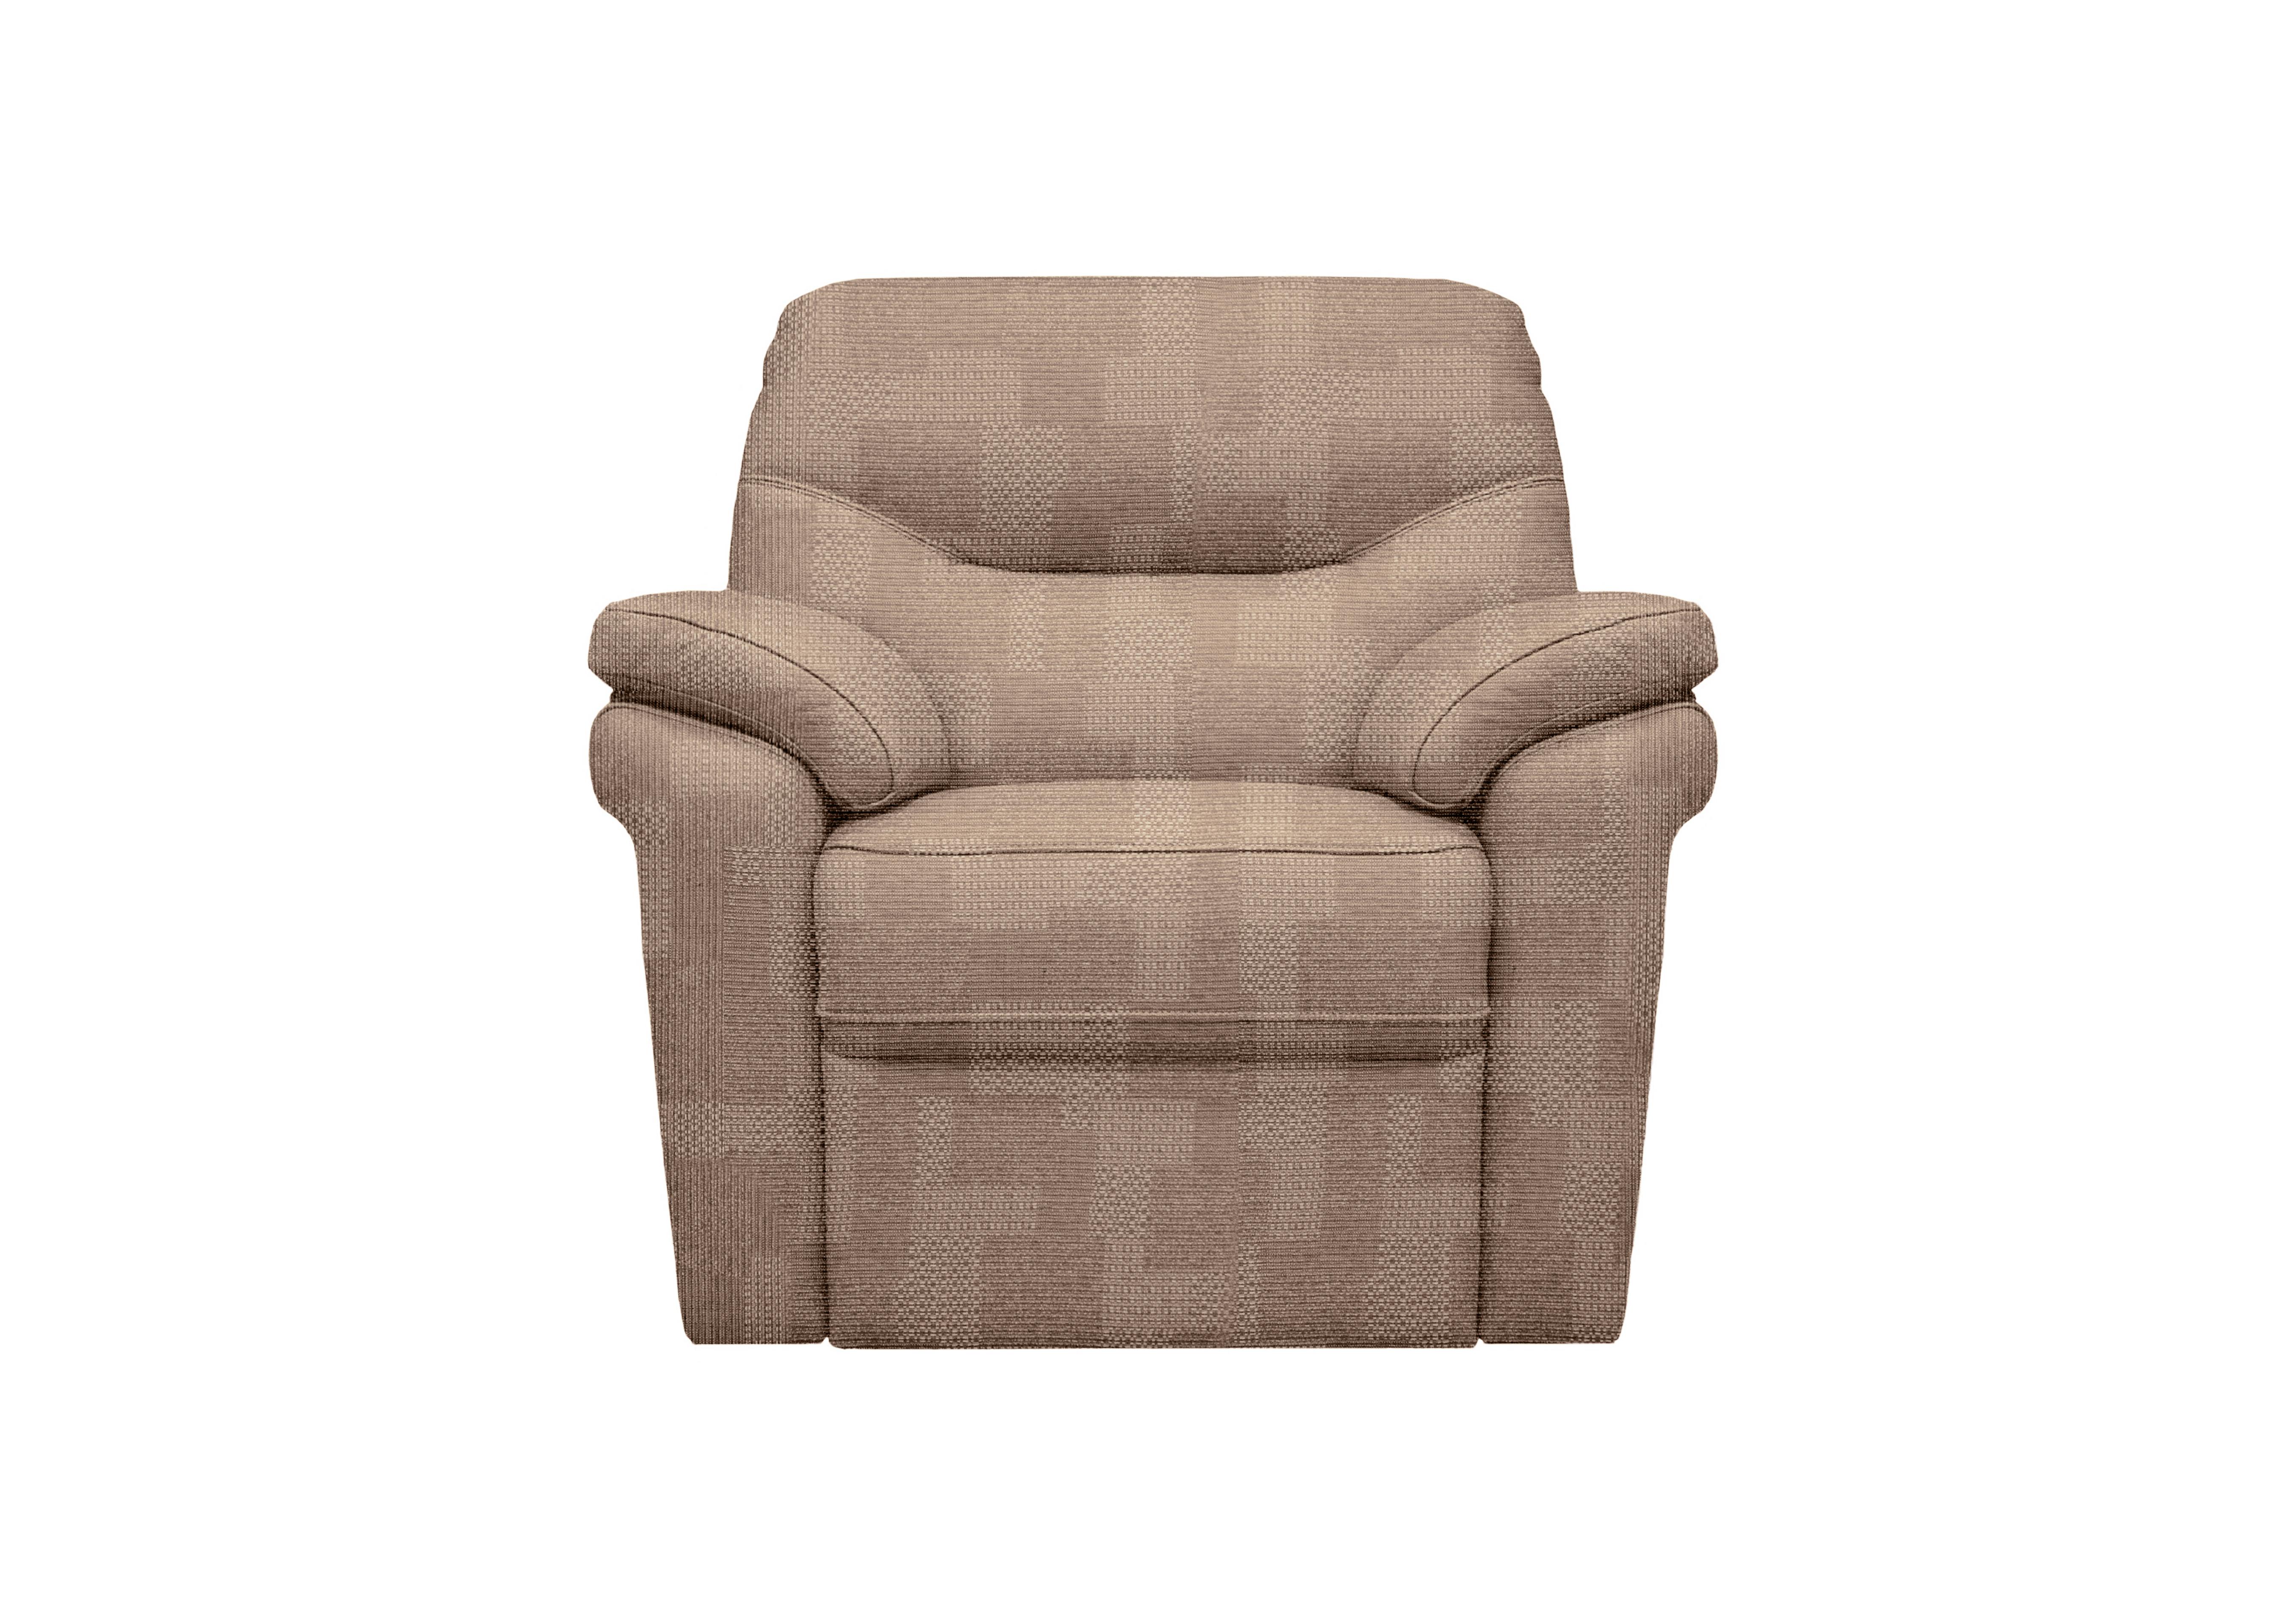 Seattle Fabric Power Recliner Armchair with Power Lumbar in A800 Faro Sand on Furniture Village